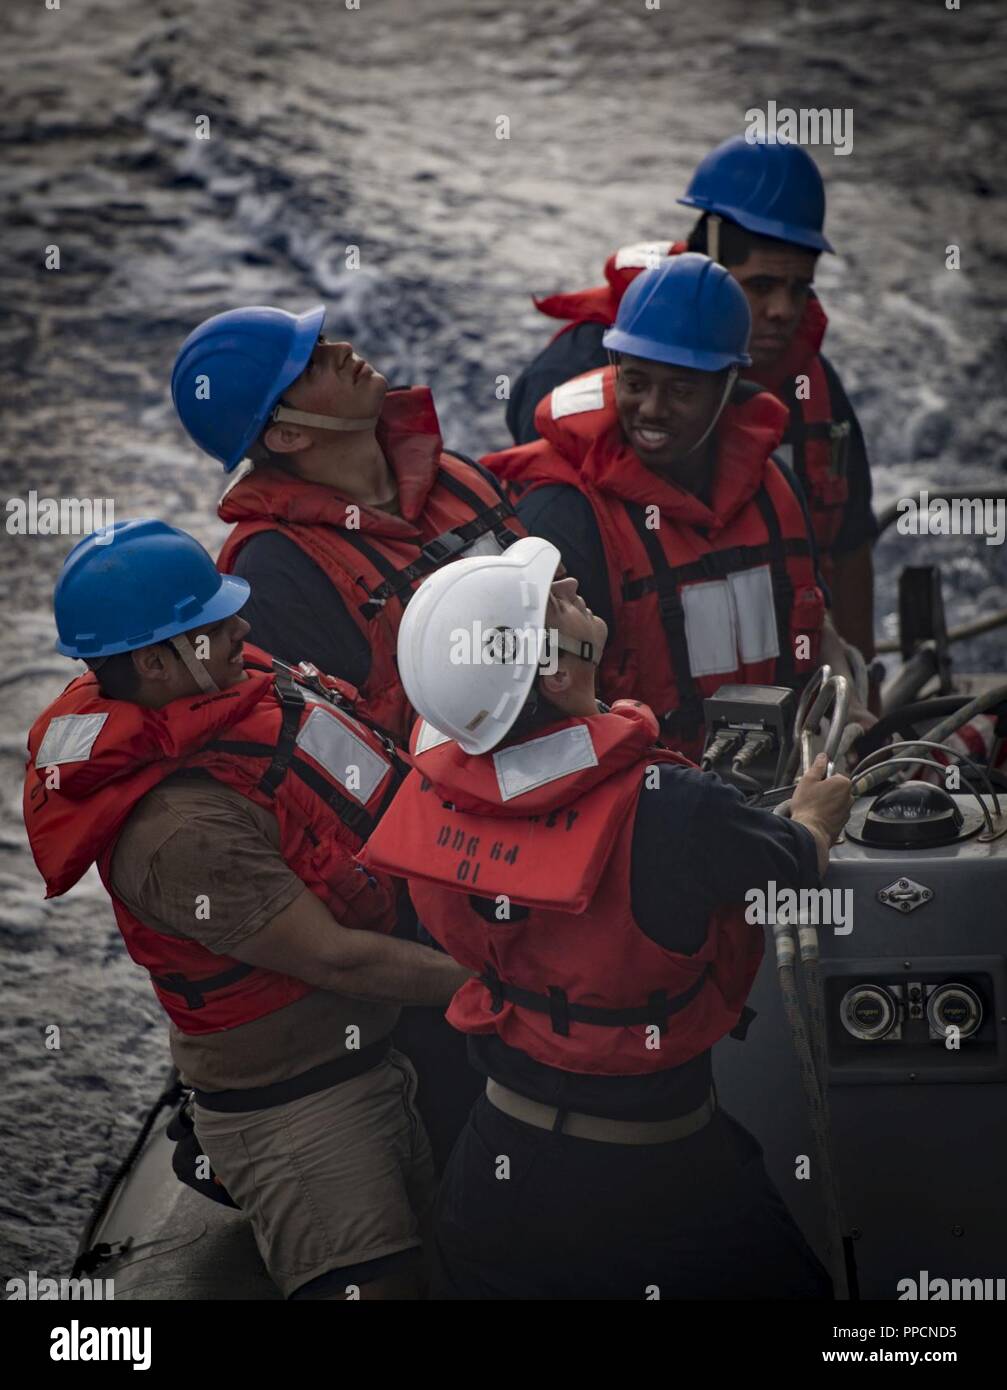 SEA (Aug. 29, 2018) Sailors prepare to raise a rigid-hull inflatable boat aboard the Arleigh Burke-class guided-missile destroyer USS Carney (DDG 64) Aug. 29, 2018. Carney, forward-deployed to Rota, Spain, is on its fifth patrol in the U.S. 6th Fleet area of operations in support of regional allies and partners as well as U.S. national security interests in Europe and Africa. Stock Photo